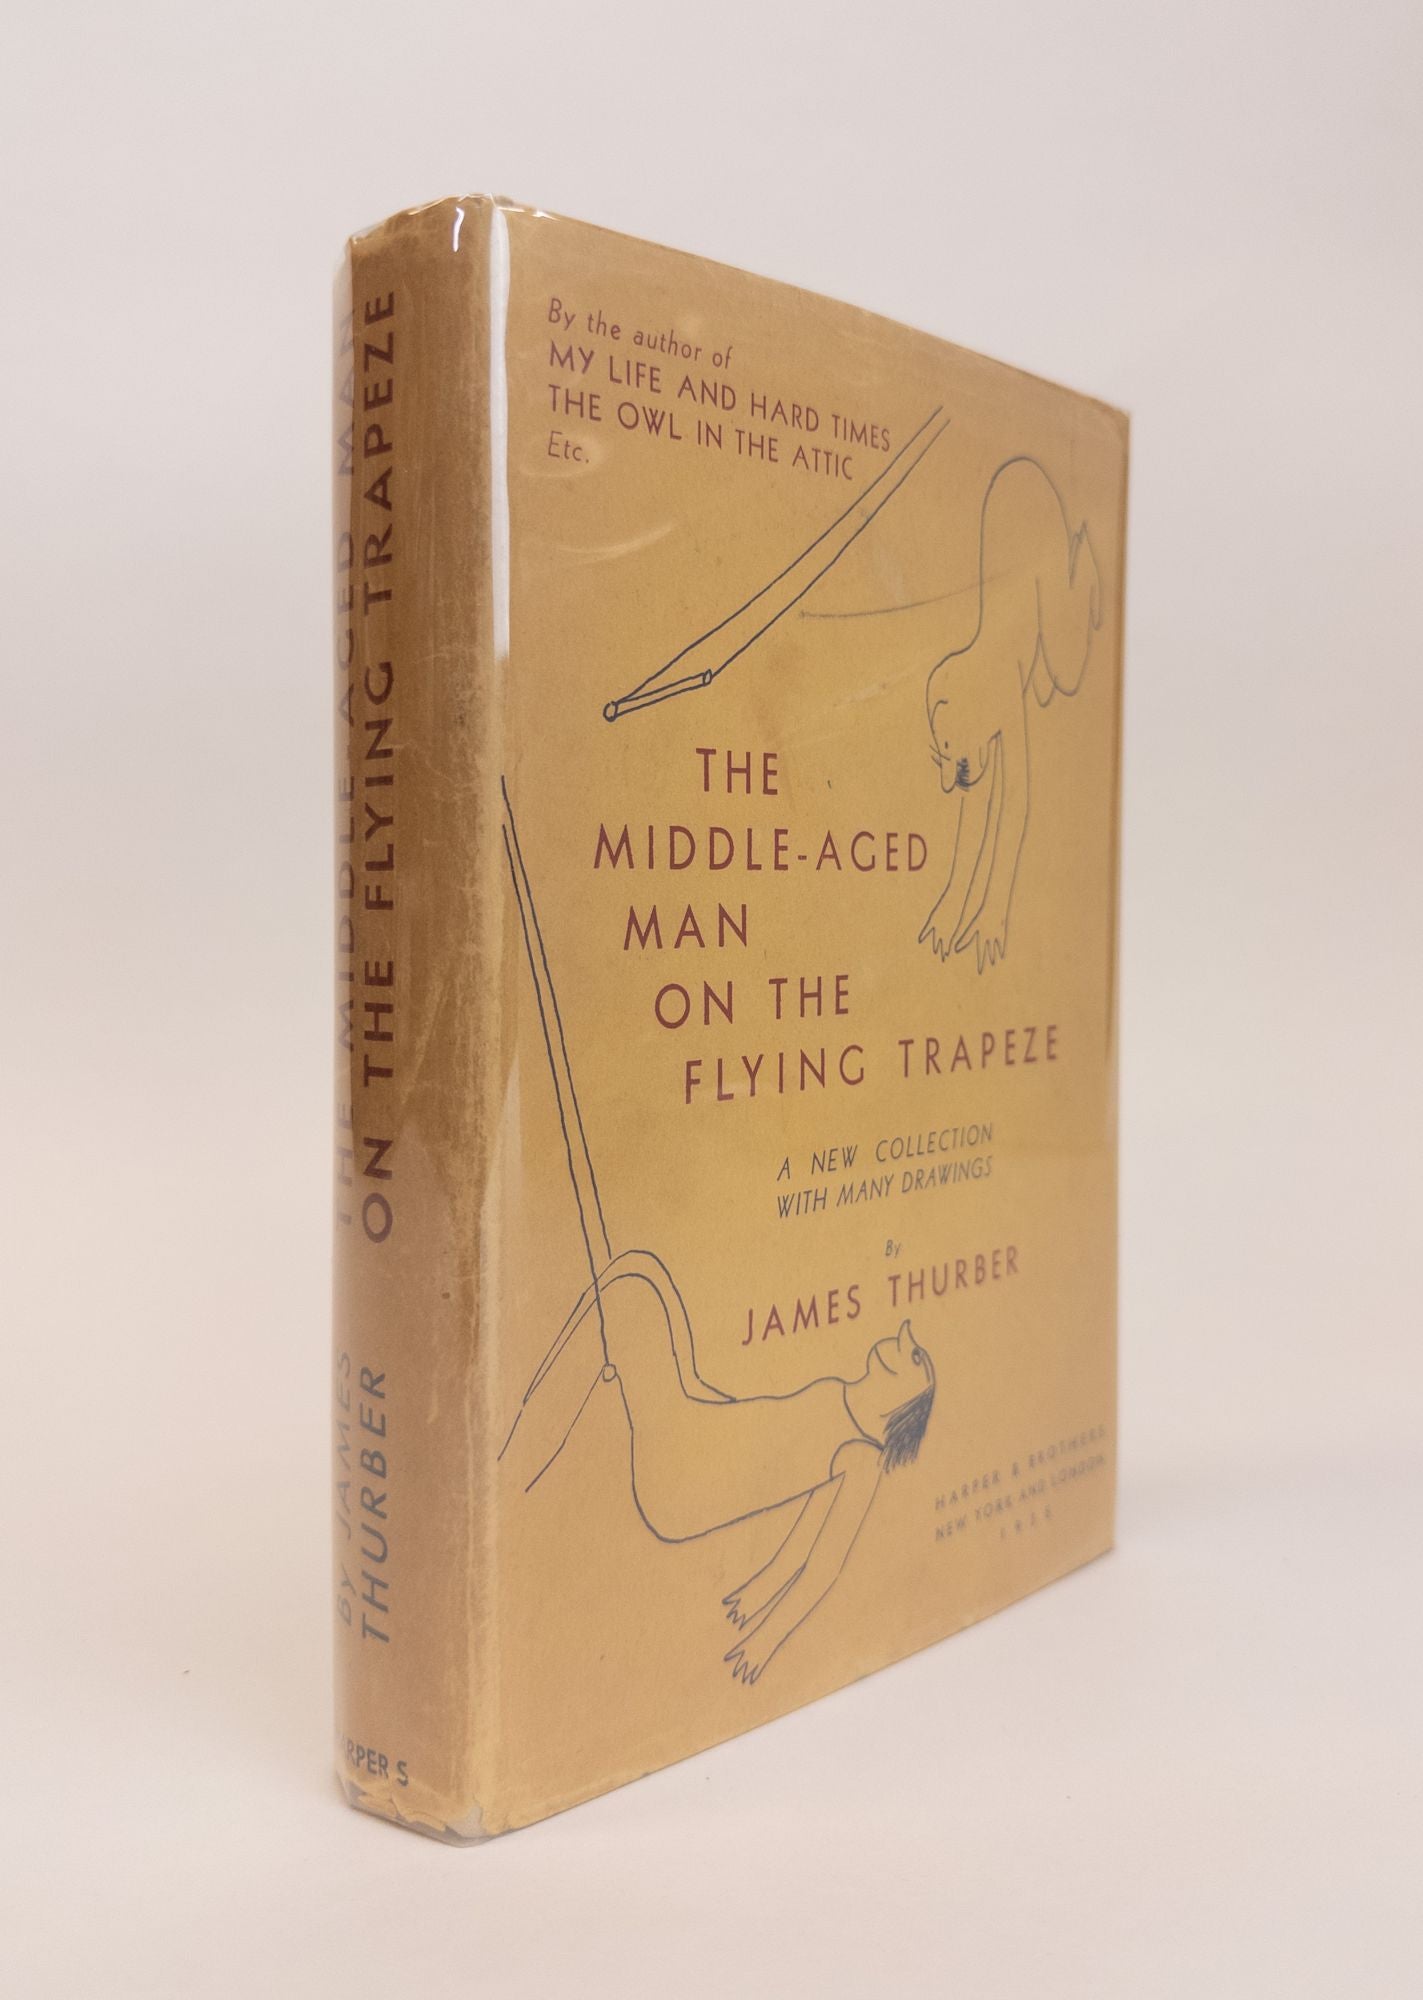 Product Image for THE MIDDLE-AGED MAN ON THE FLYING TRAPEZE [Larry McMurtry's Copy]